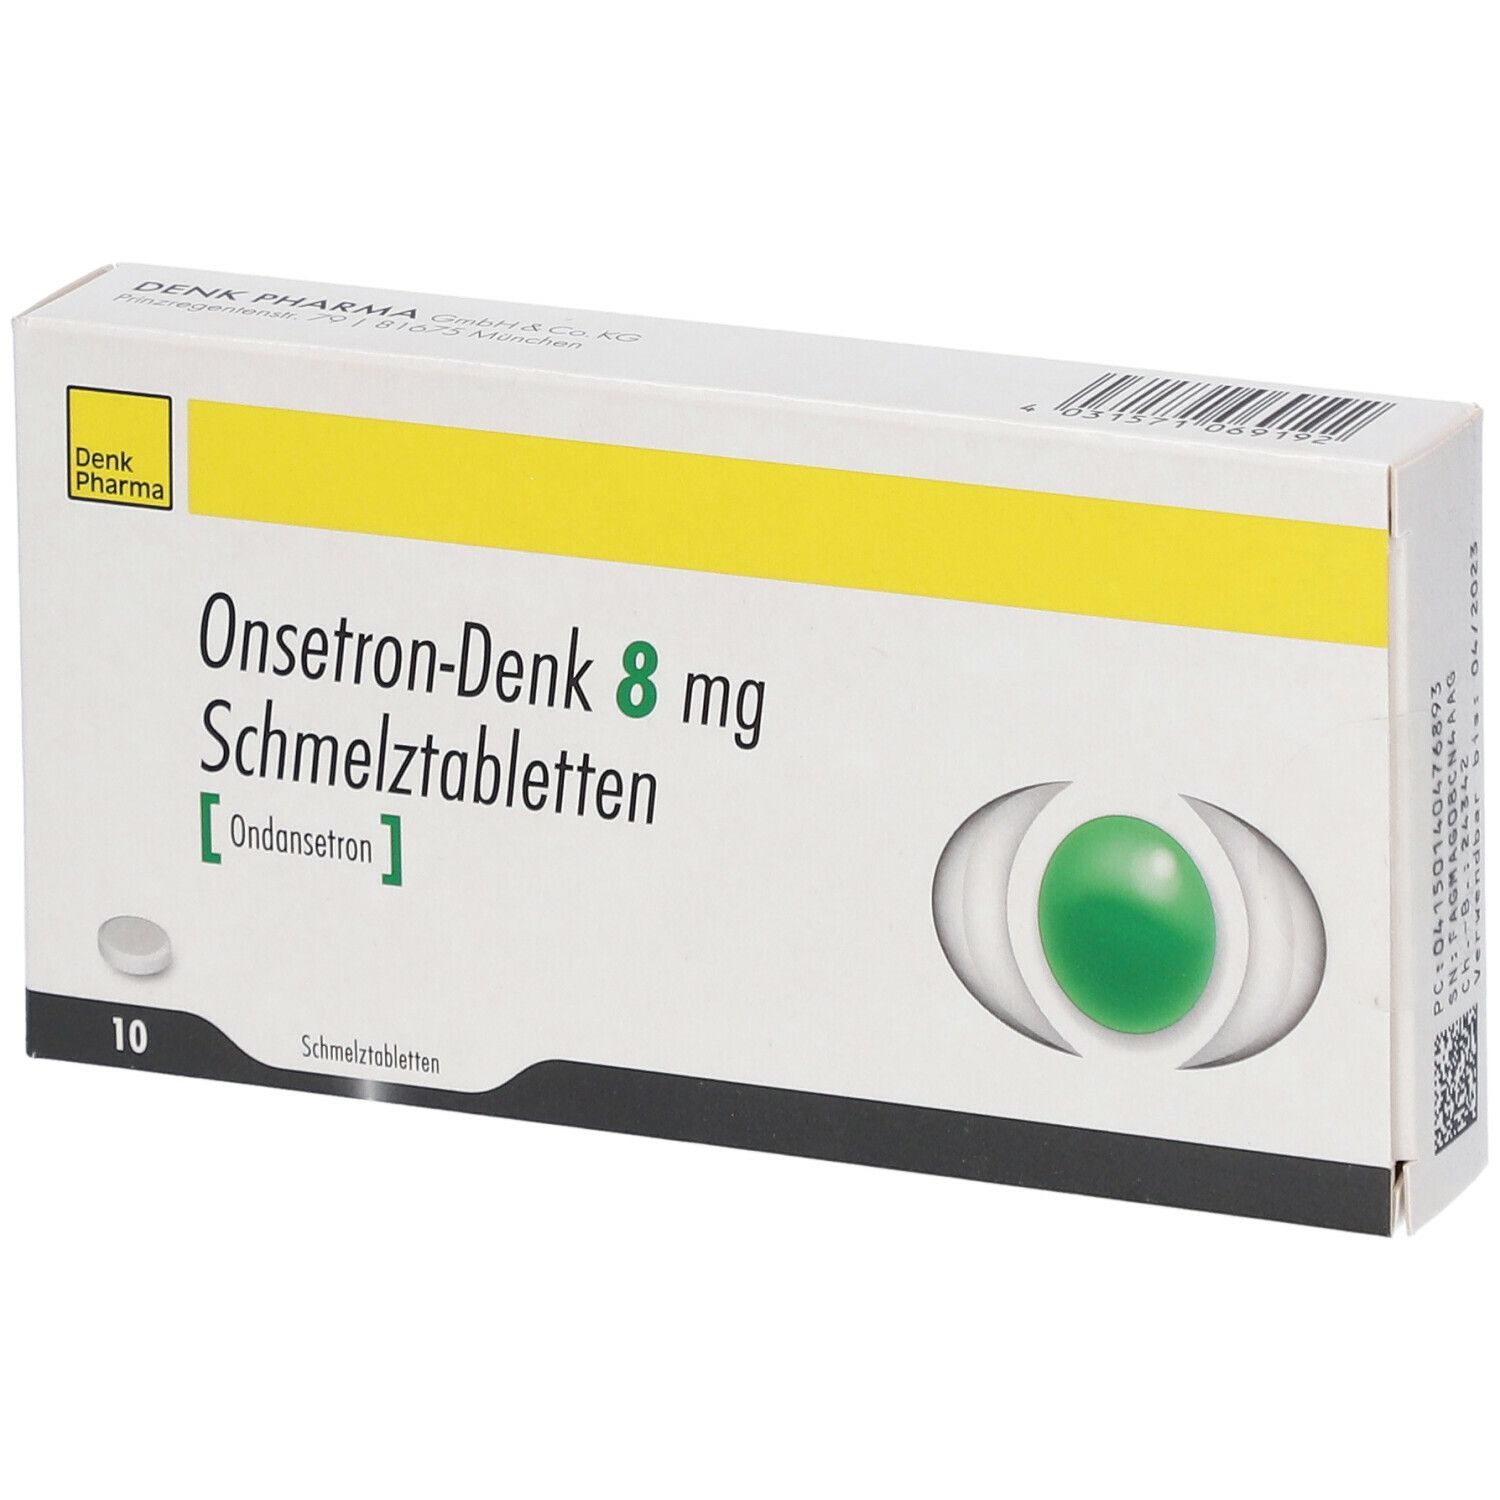 Onsetron-Denk 8 mg